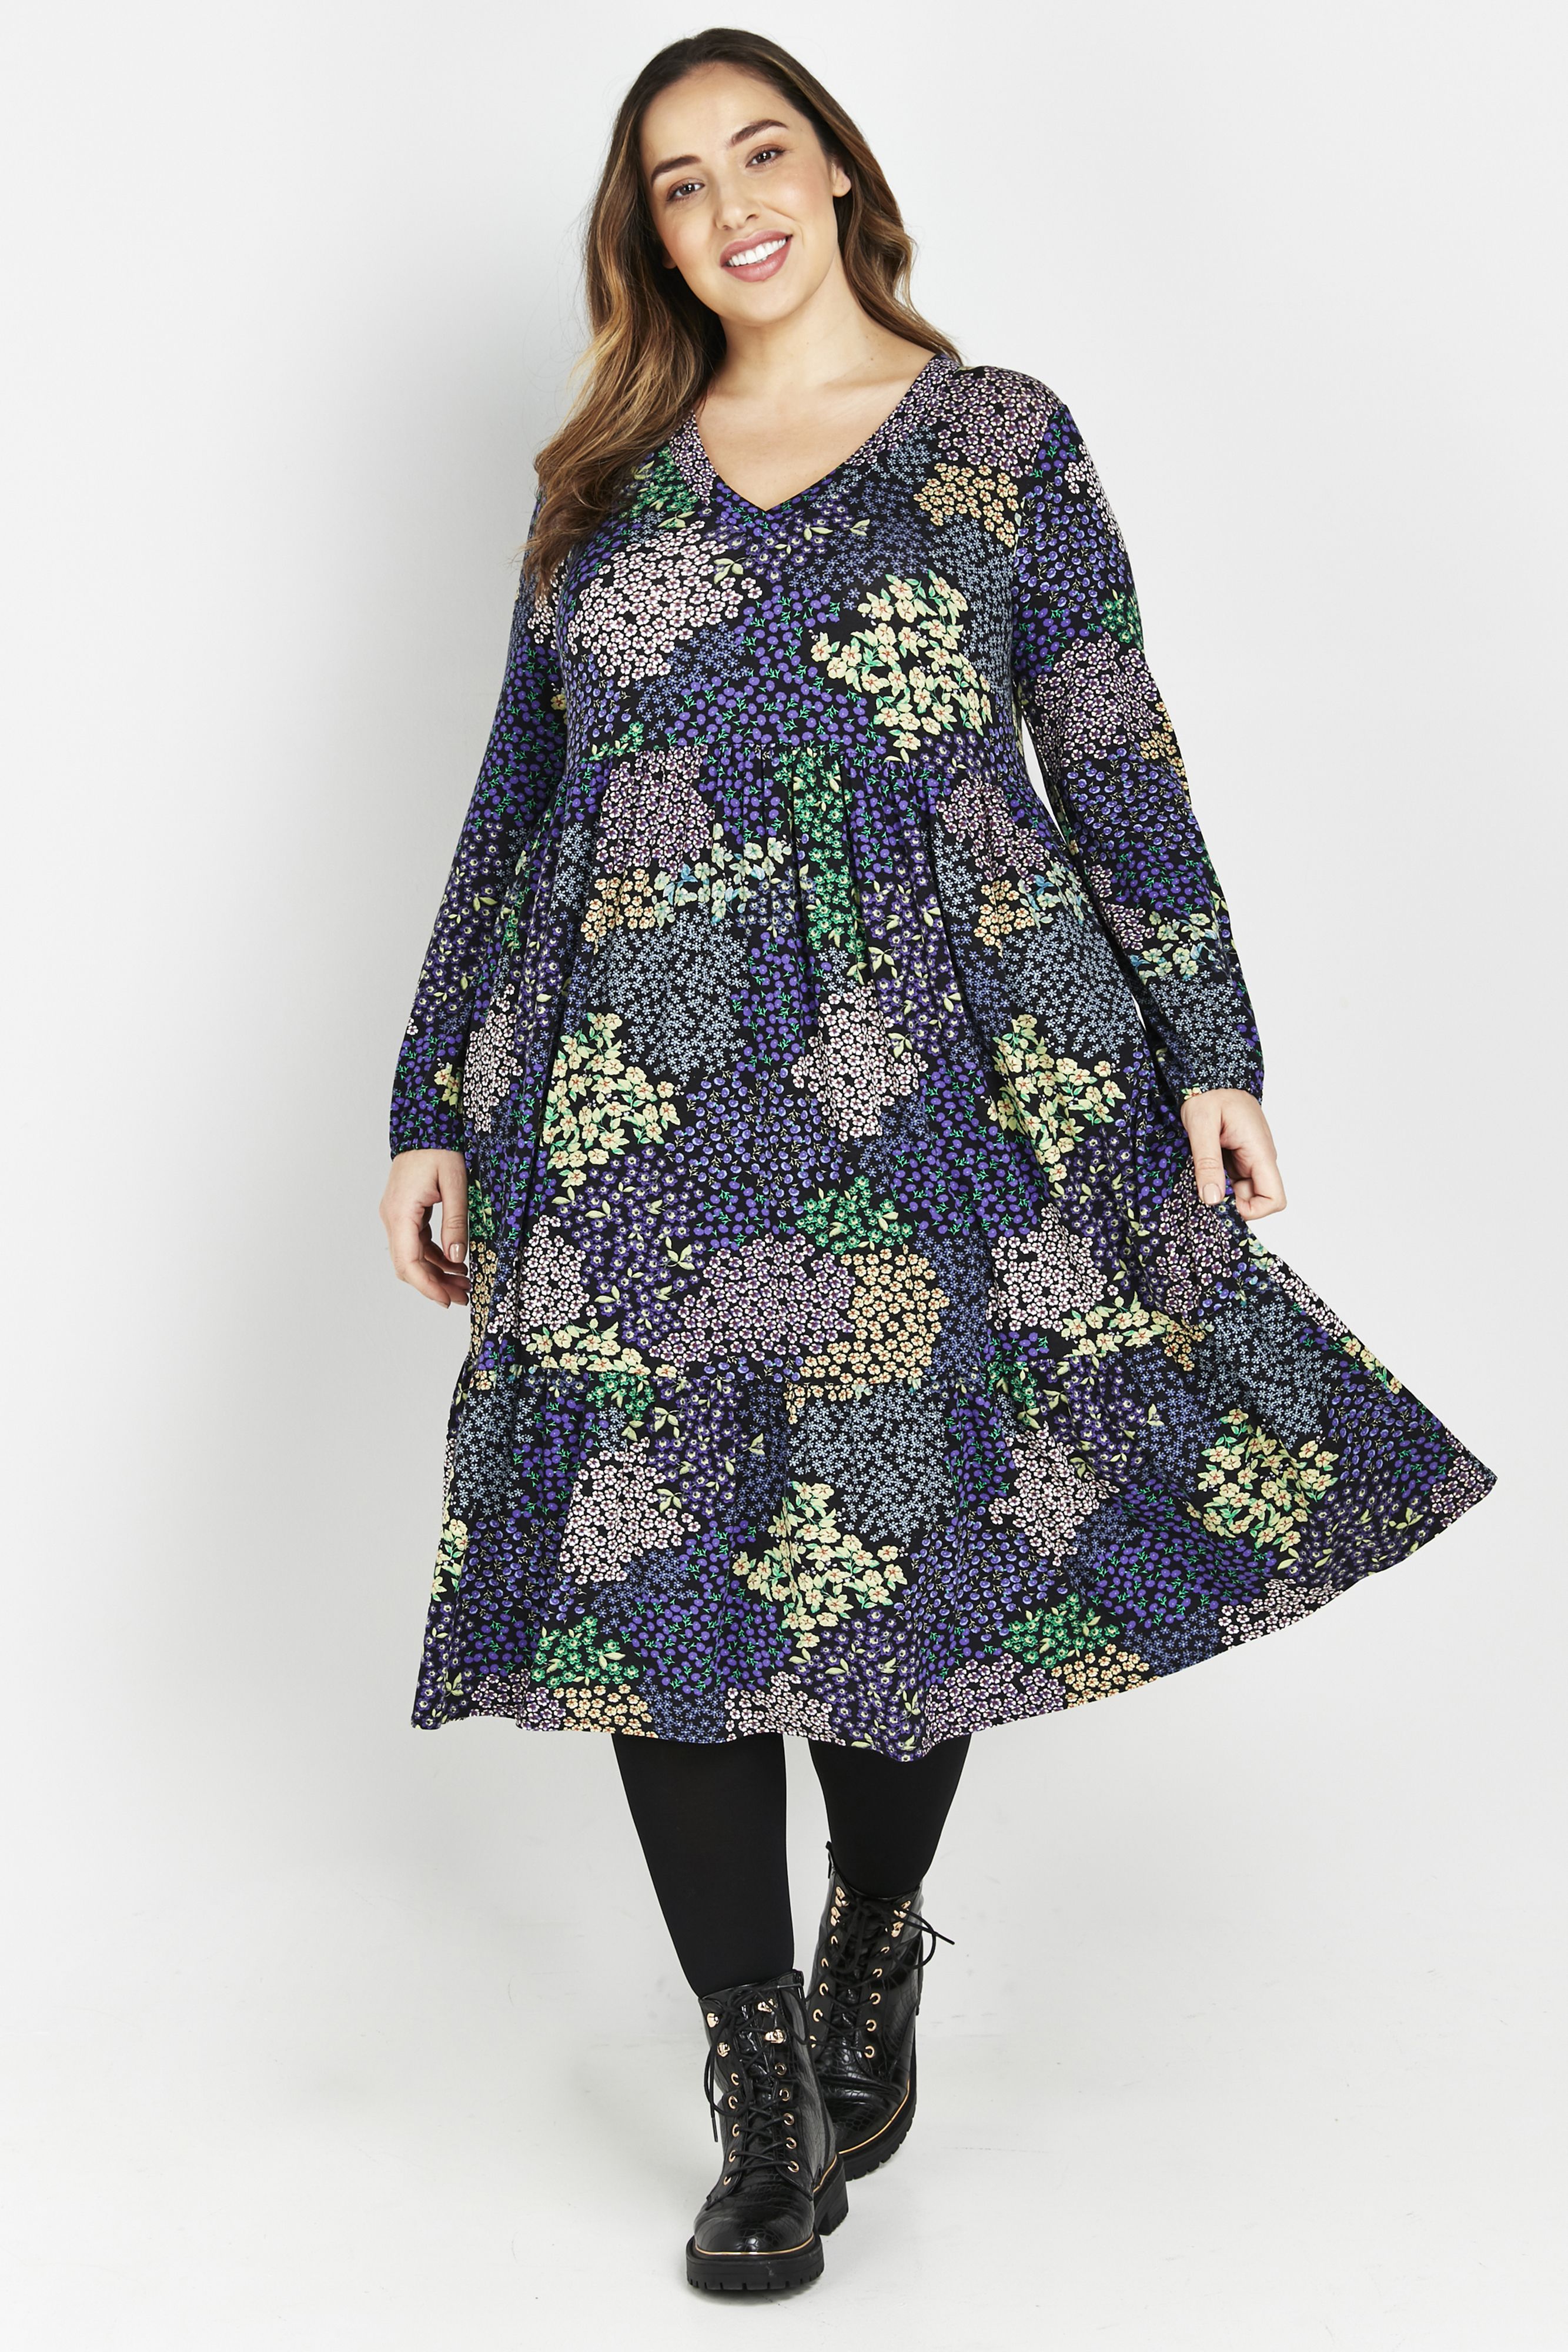 Flirt with florals this season in the cute Patchwork Floral Tiered Dress. A cute patchwork print will bring a pop of colour to your everyday wardrobe, whilst a relaxed floaty fit will have you wearing it on-repeat. Key Features Include: - V-neckline - Long sleeves - Functional side pockets - Relaxed fit - Midi length tiered skirt Style with tights and heeled ankle boots for a playful & effortless everyday look.